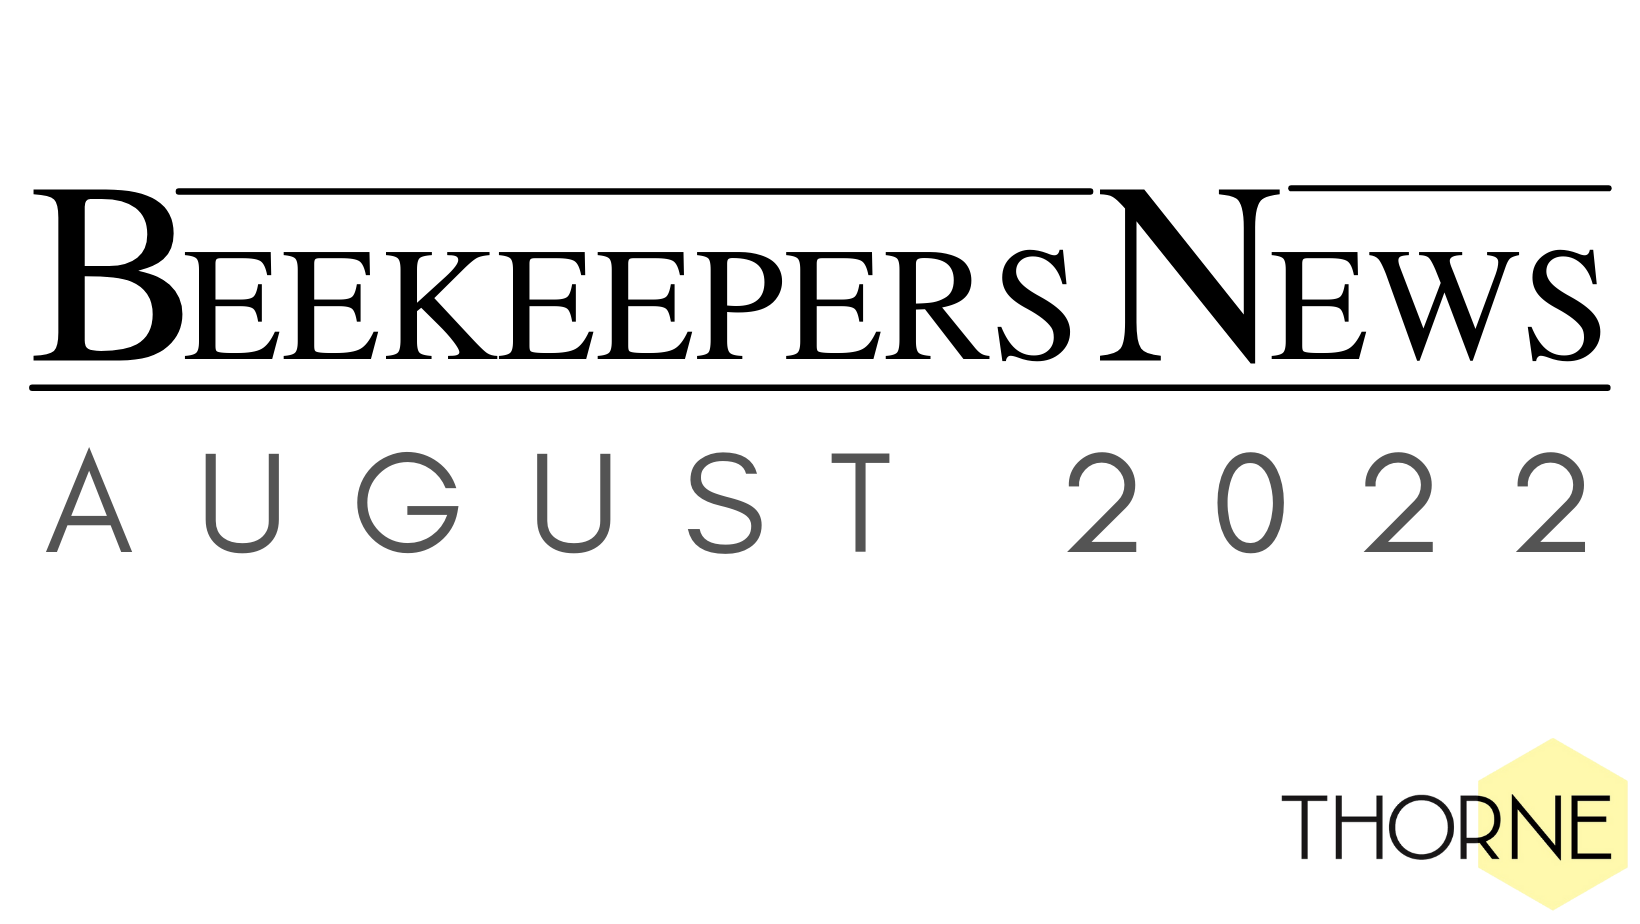 Beekeepers News - August - Issue 71